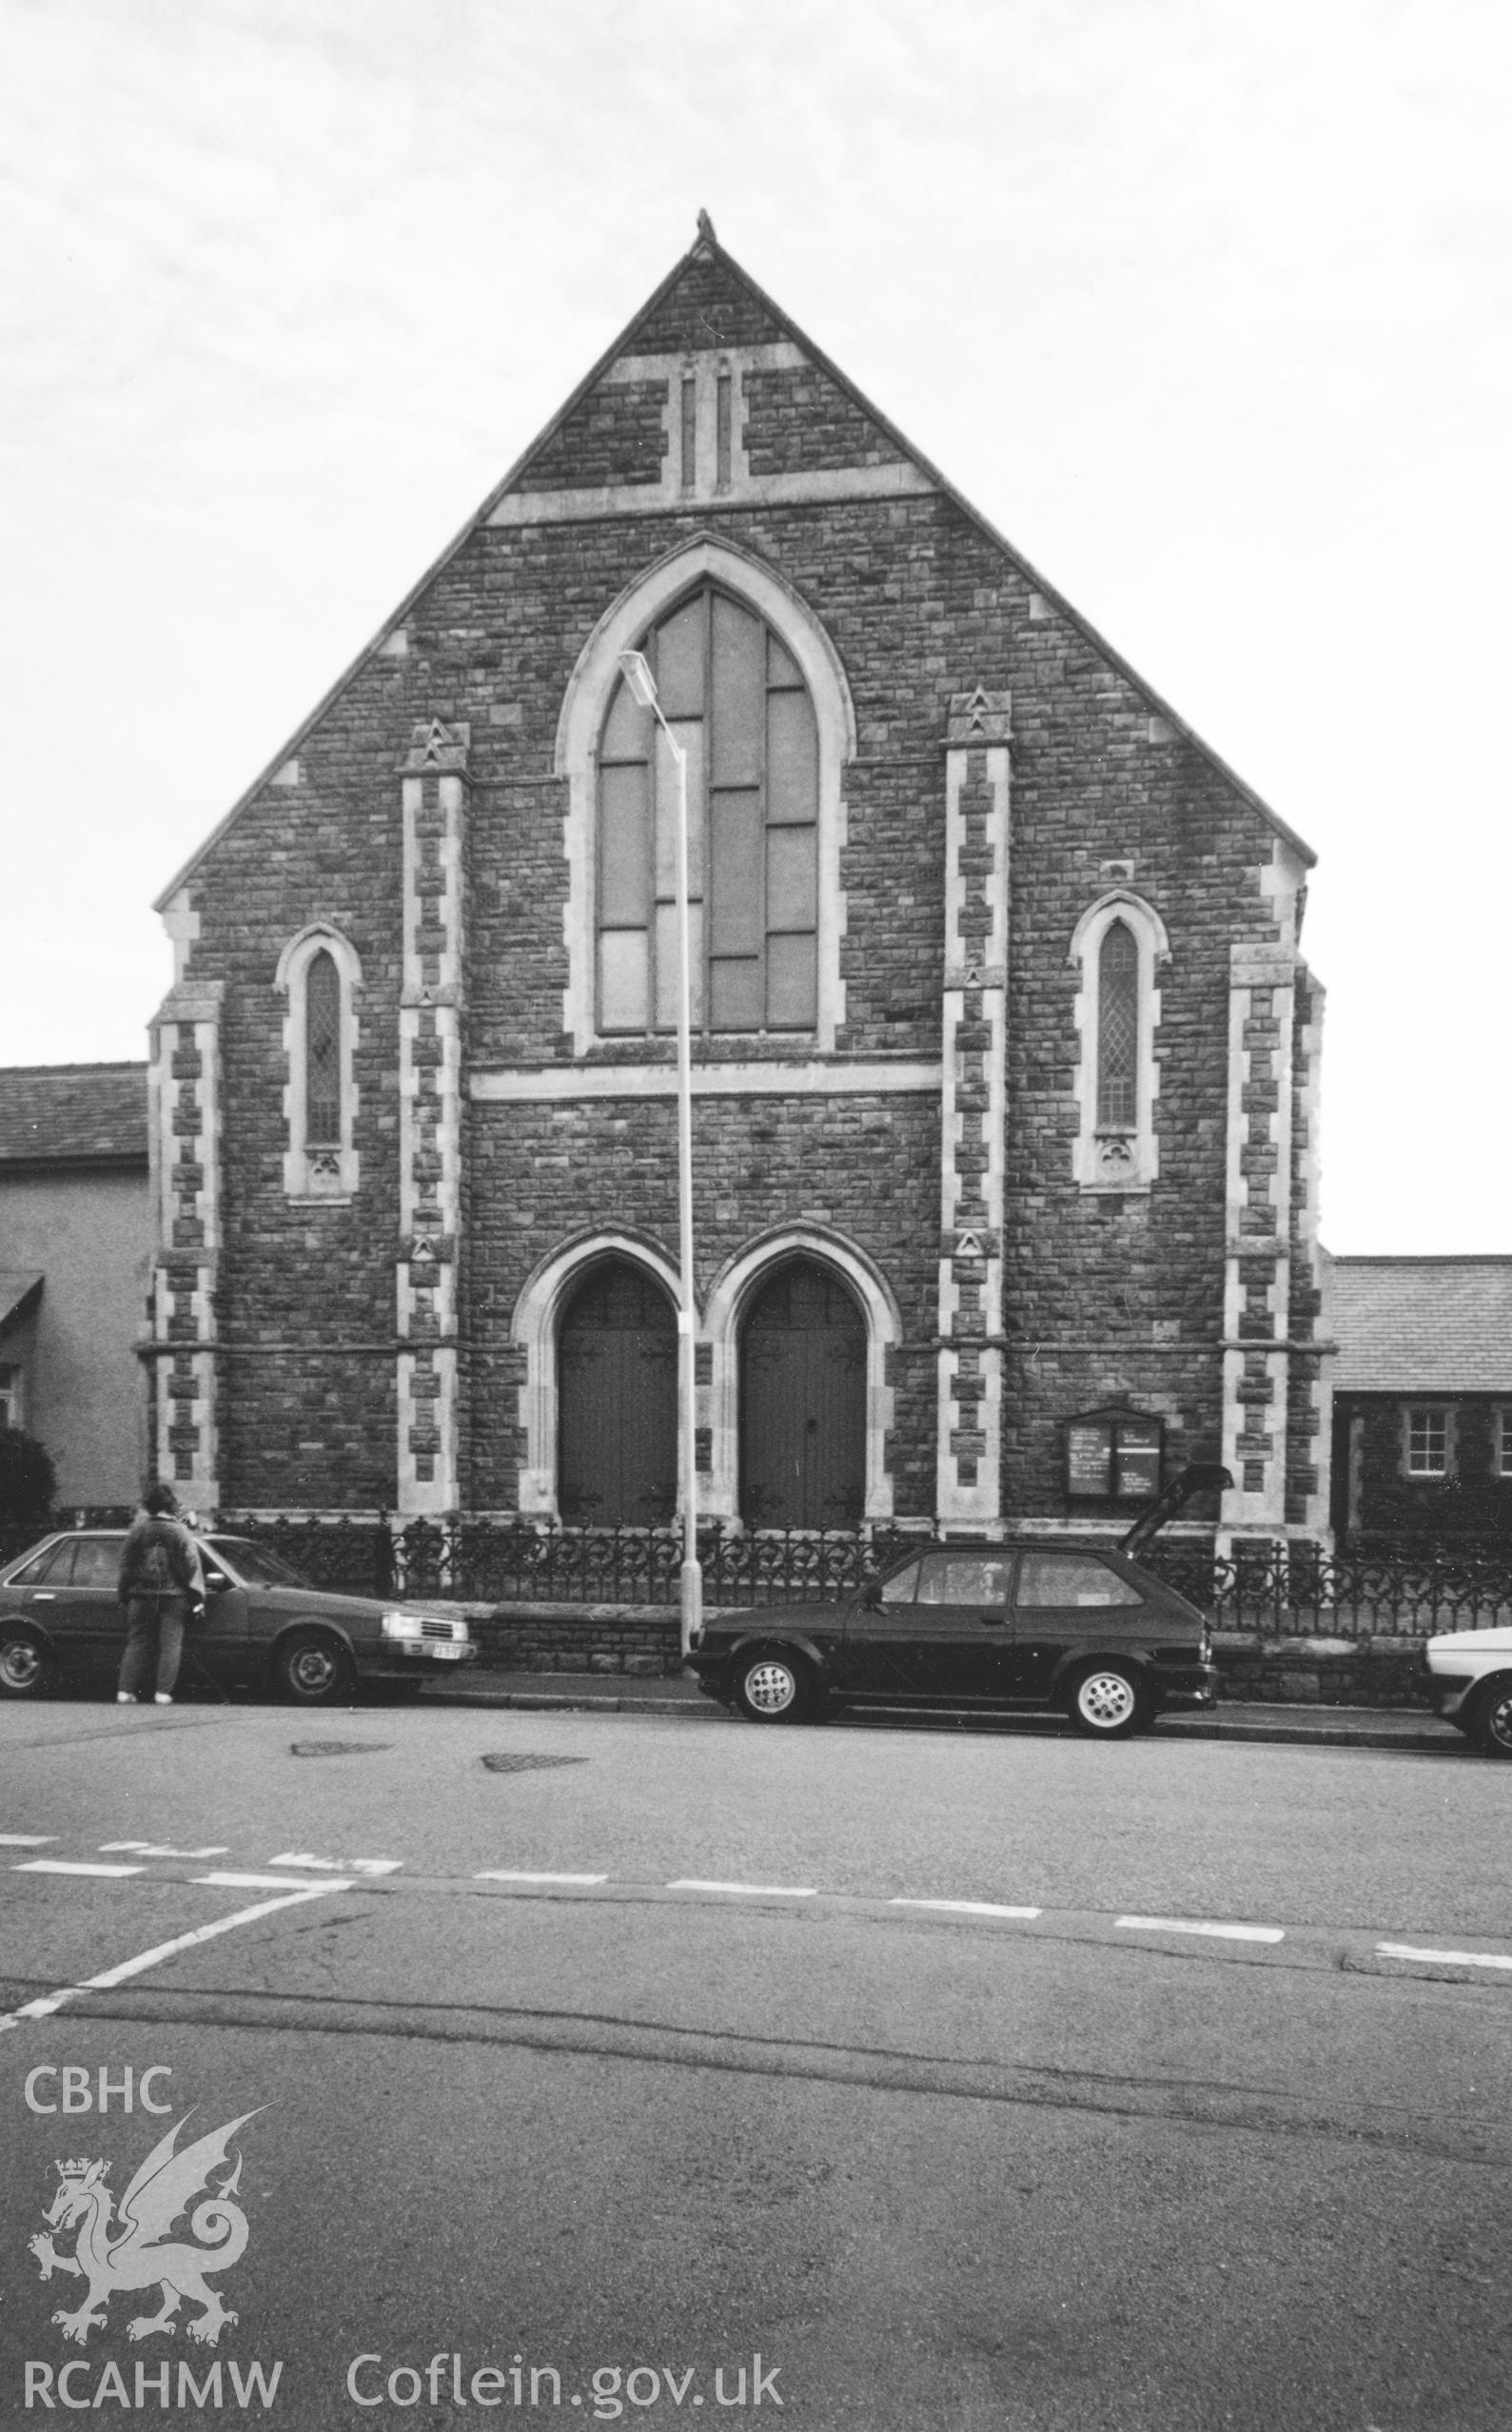 Digital copy of a black and white photograph showing an exterior view of Priory Road Wesleyan Methodist Chapel, Milford Haven, taken by Robert Scourfield, c.1996.